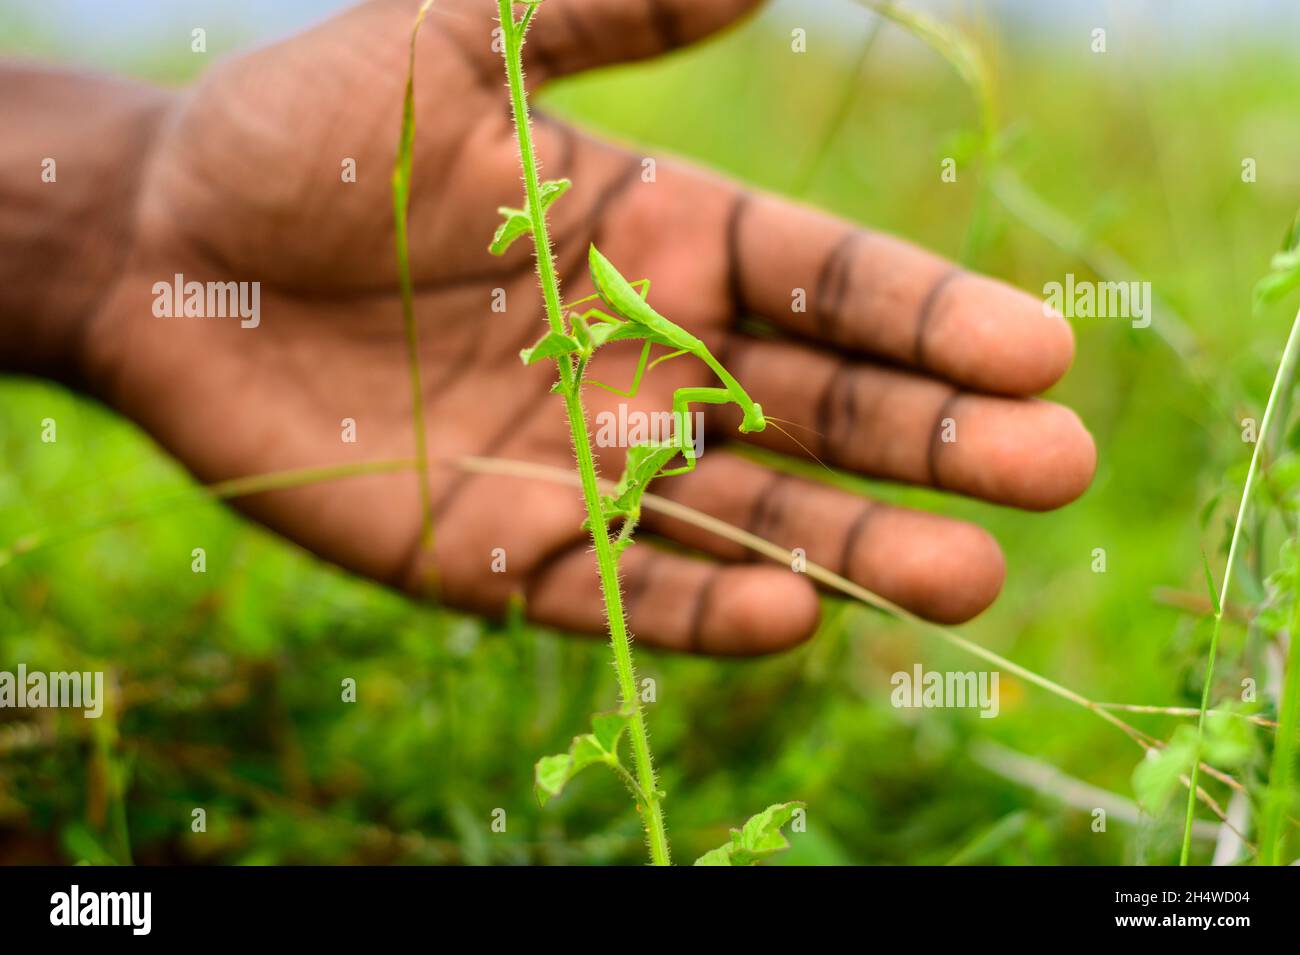 Praying mantis perched on a small green plant, boys hand behind the mantis to point out camouflaged species. Stock Photo